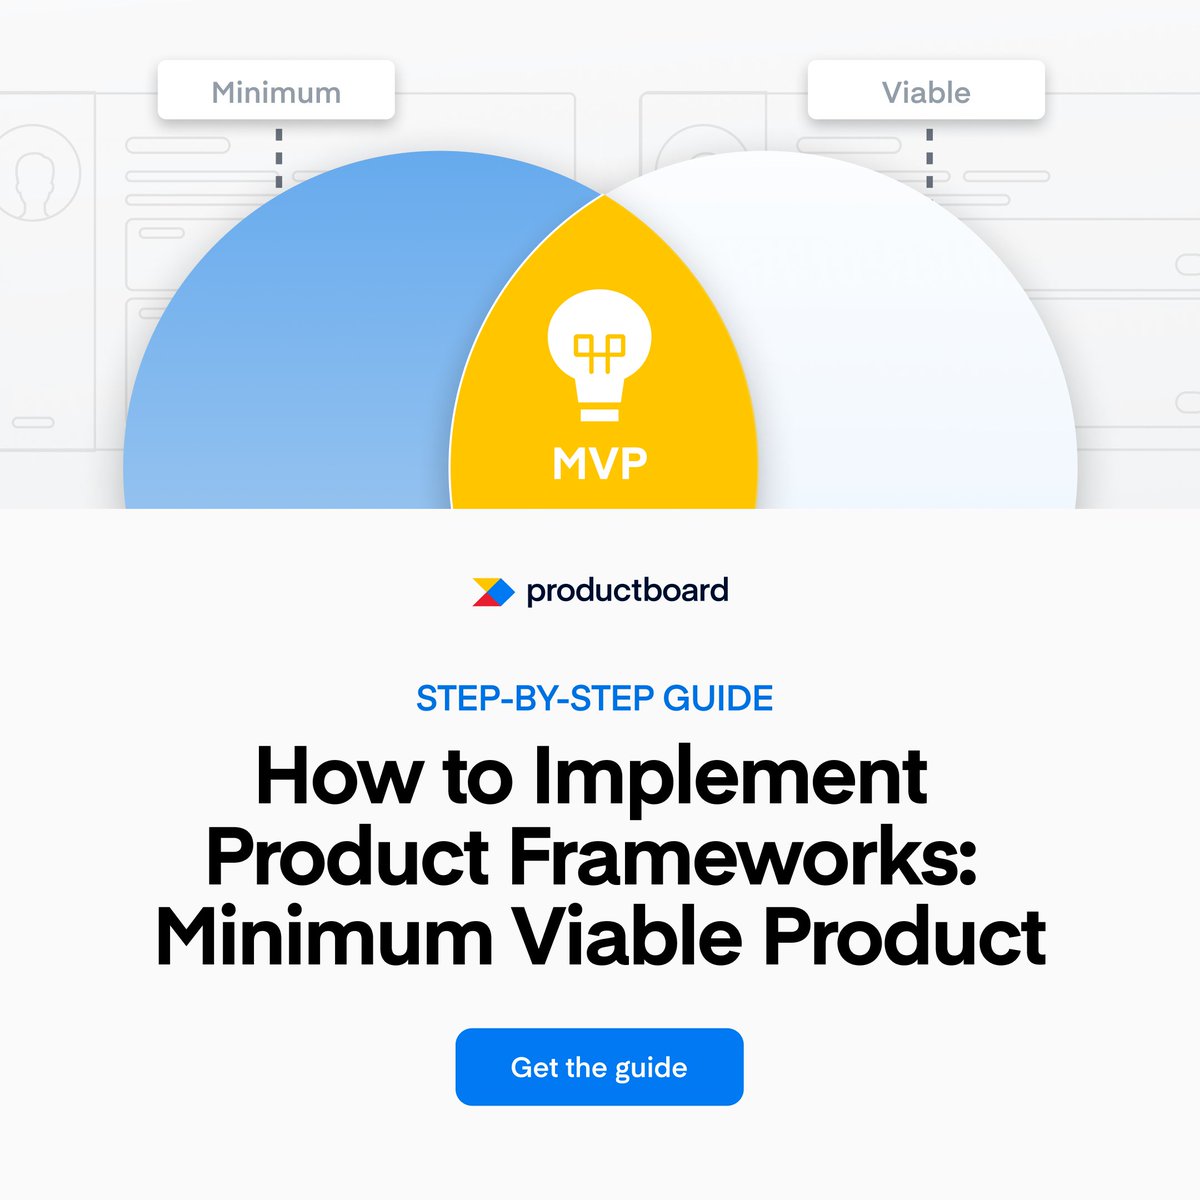 🚀 Elevate your #productstrategy with our Minimum Viable Product (MVP) Framework Guide! Learn how to validate customer value, mitigate risks, and continuously enhance your product. Download your copy now: bit.ly/3vFfylg #ProductFramework #MVP #ProductManagement